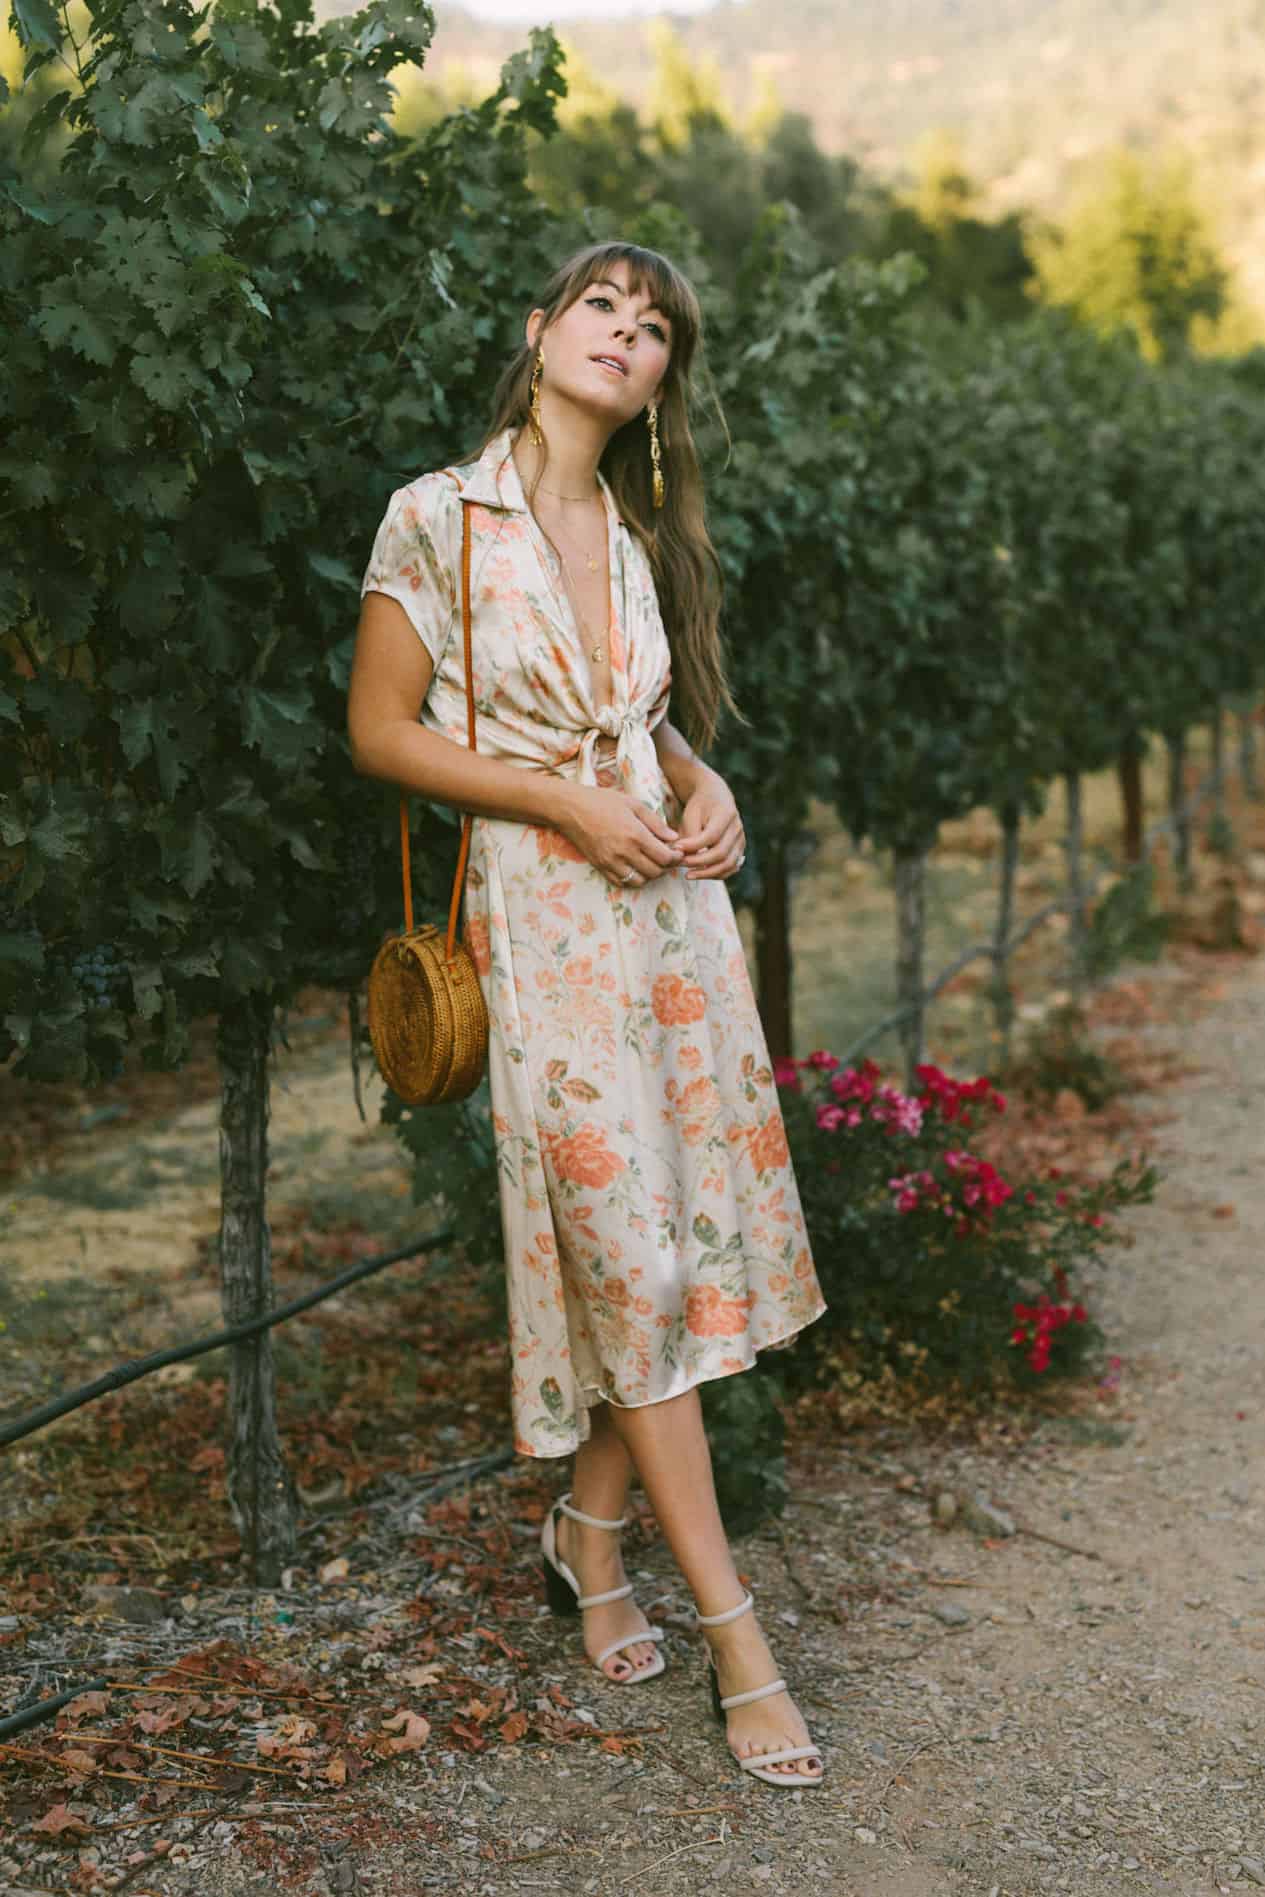 image of a woman wearing a silk floral dress with a straw round bag standing in a vineyard along grape vines